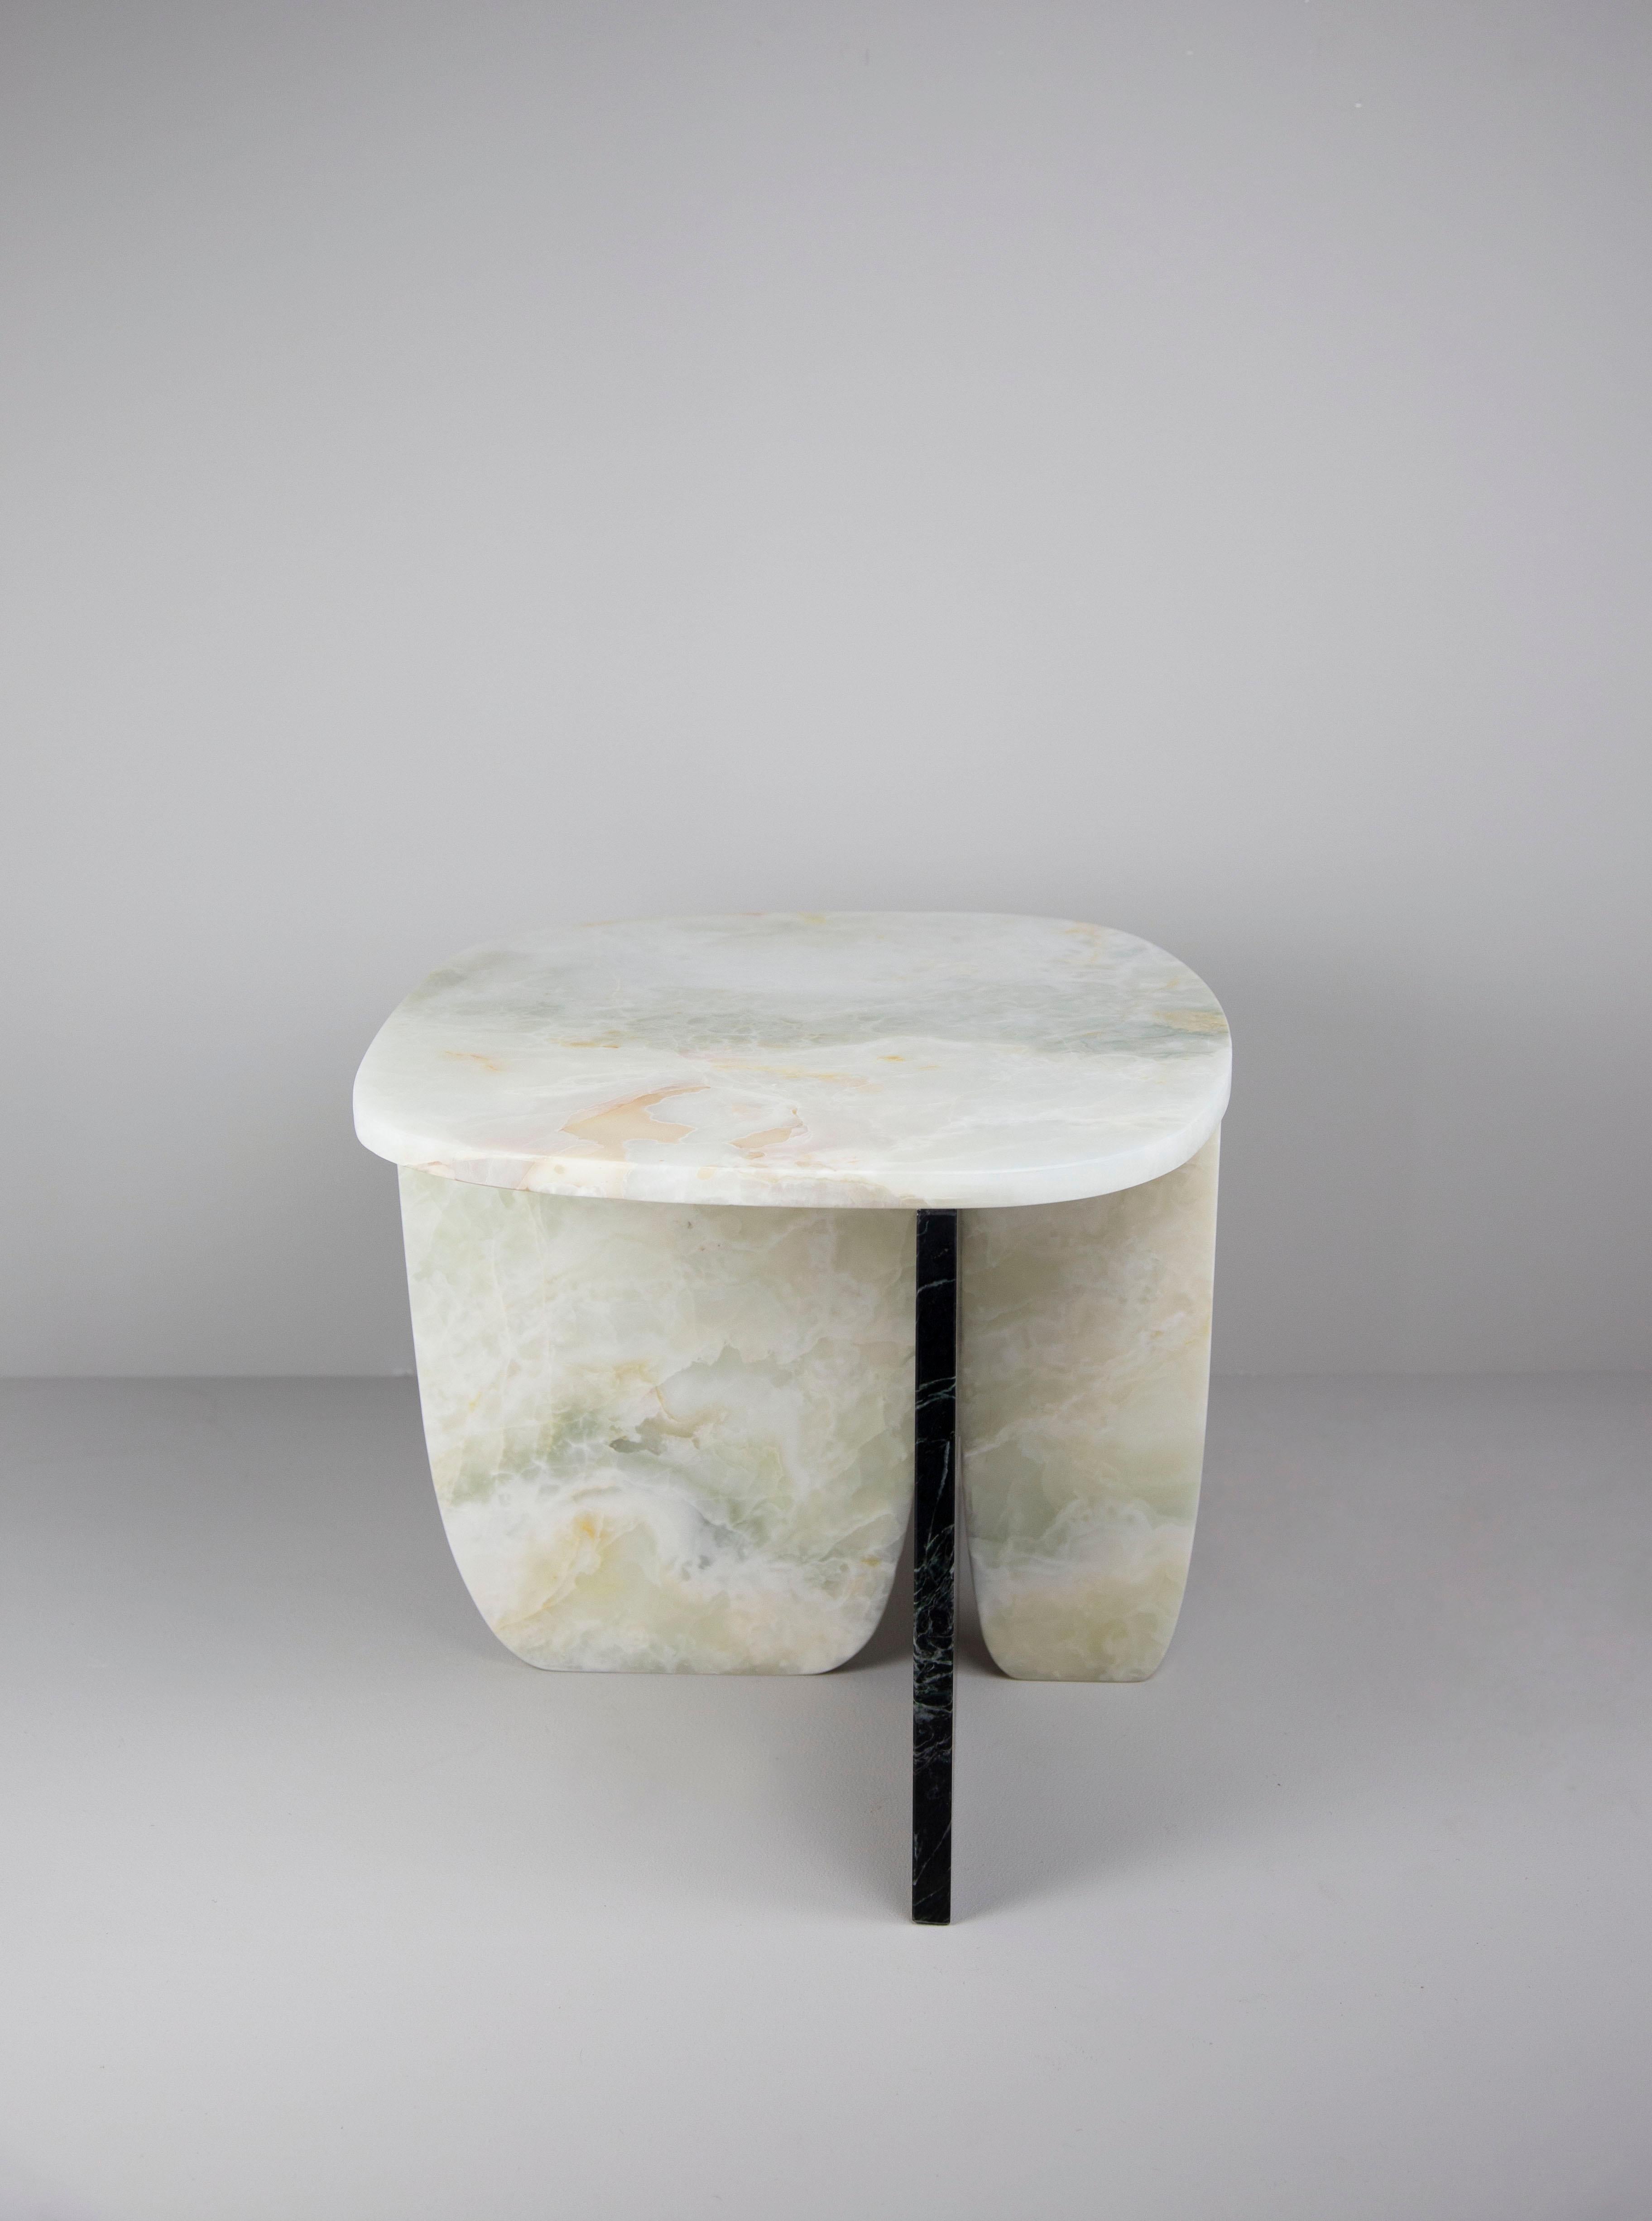 Onyx coffee table by OS and OOS
Dimensions: 55 x 47 x 40 cm
Materials: Onyx and Verde Patrizia
The table might be slightly different from the images as each table is unique and depends on the onyx and marble shapes.

Studio OS and OOS is a